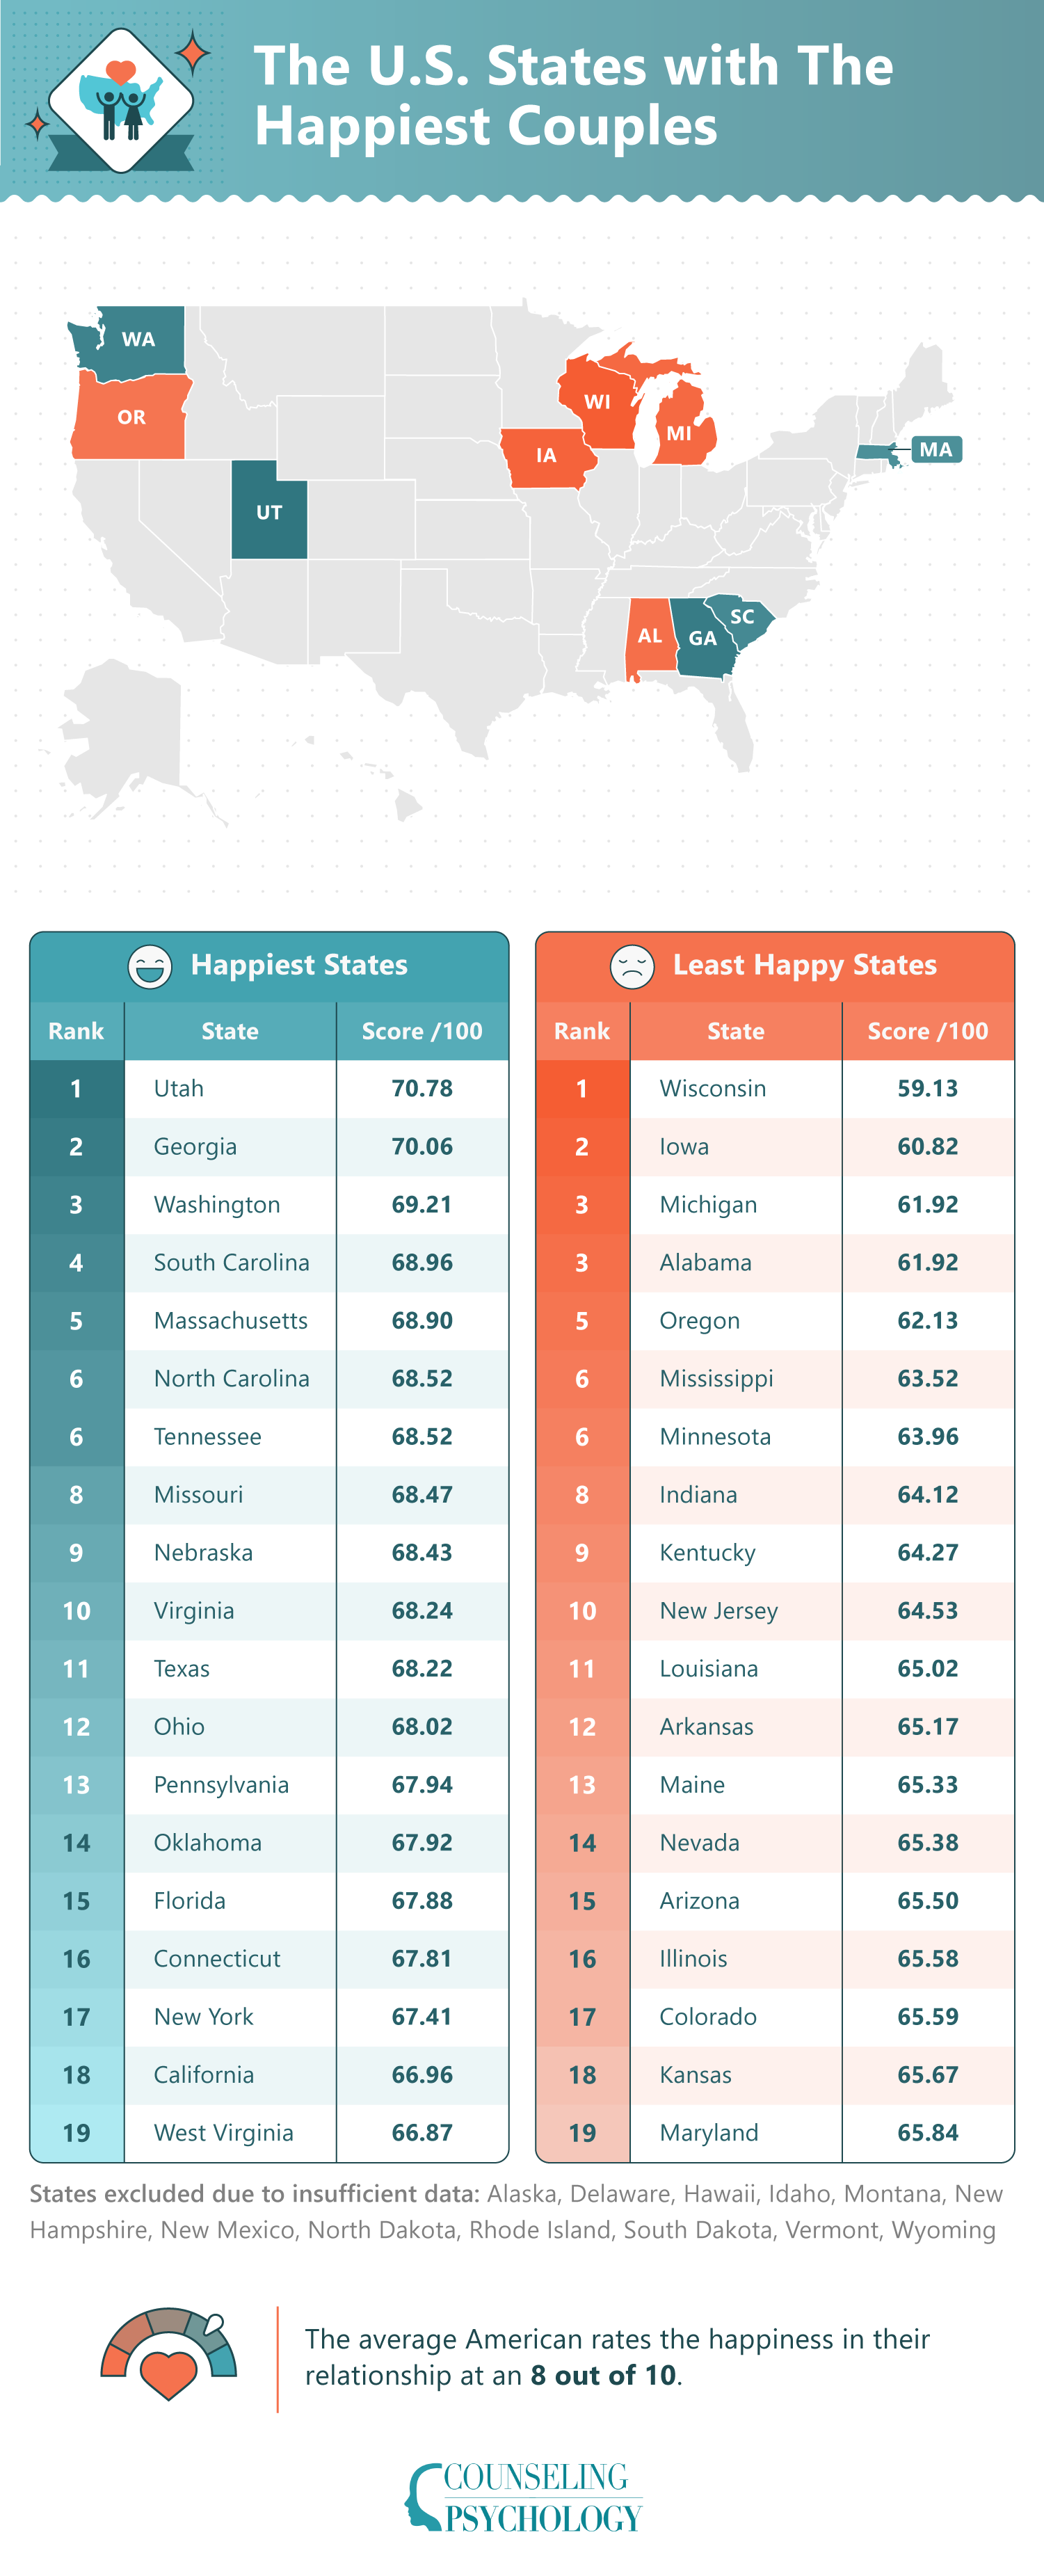 Rankings of the U.S. states with the happiest and least happy couples.
